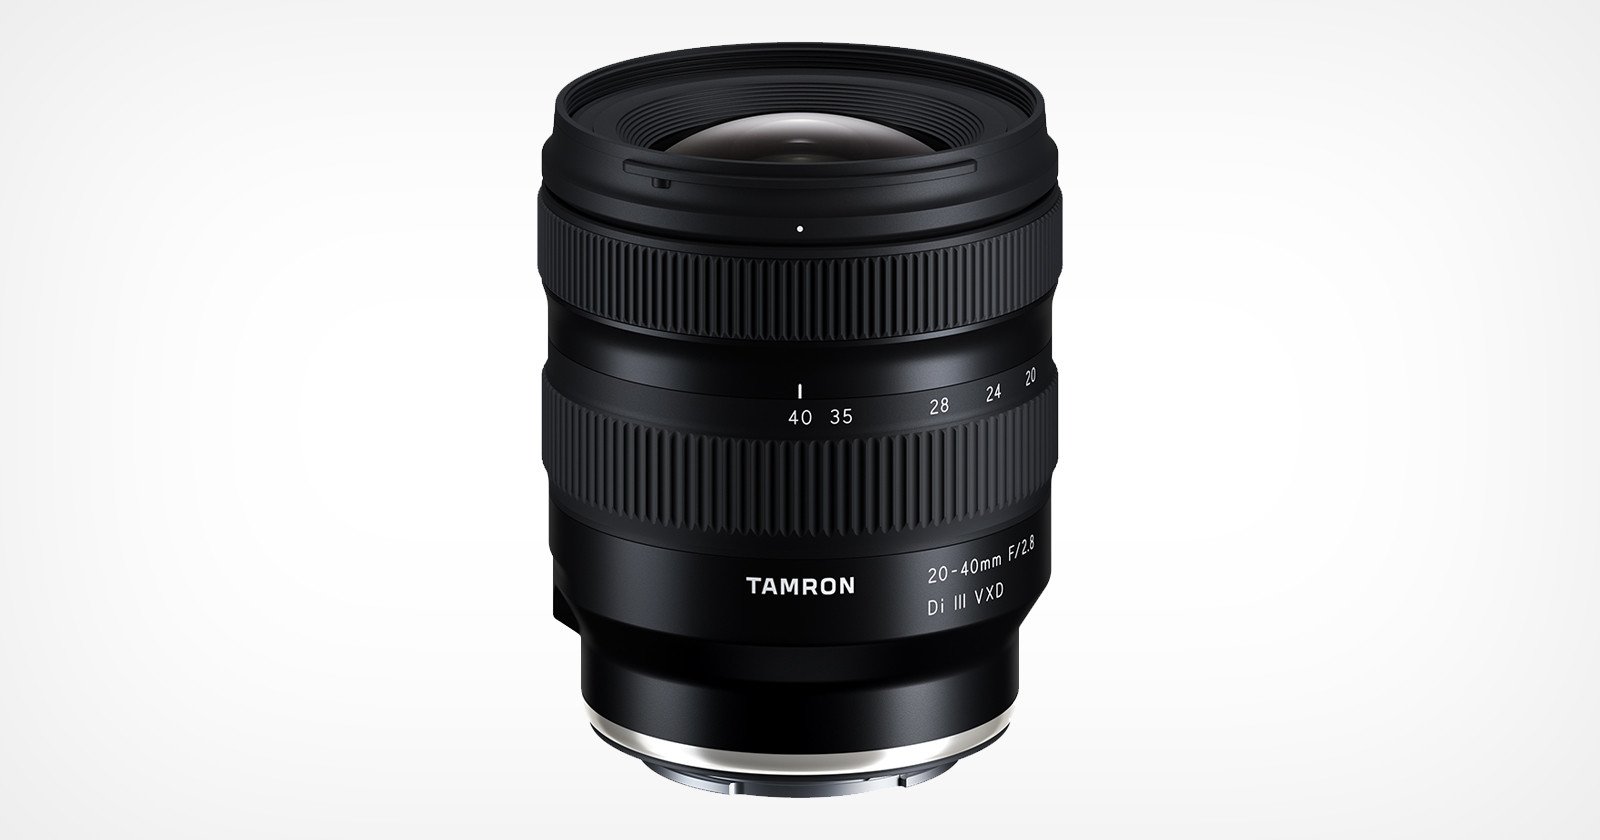 Tamrons New 20-40mm f/2.8 Lens is the Smallest and Lightest in its Class